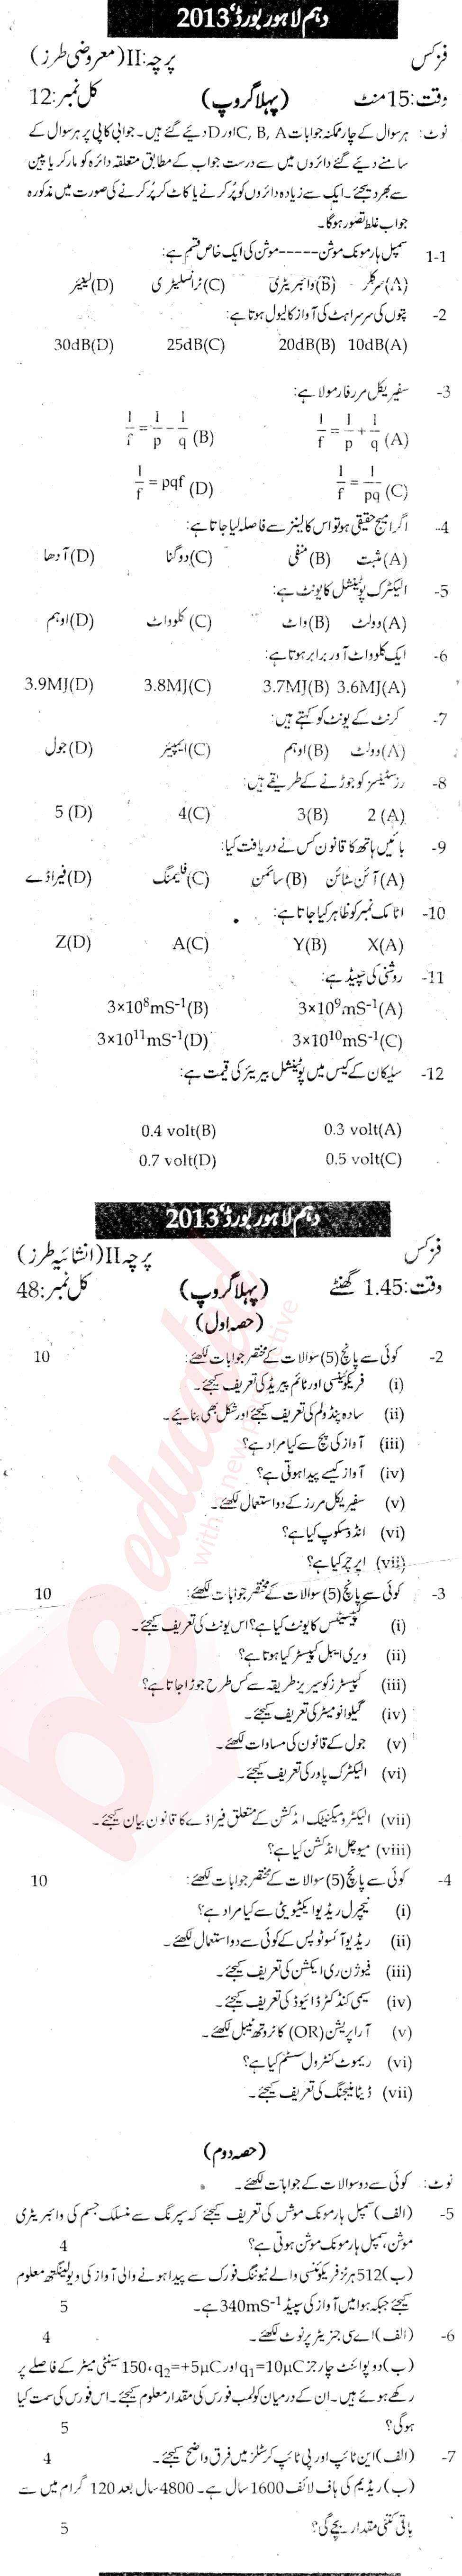 Physics 10th class Past Paper Group 1 BISE Lahore 2013